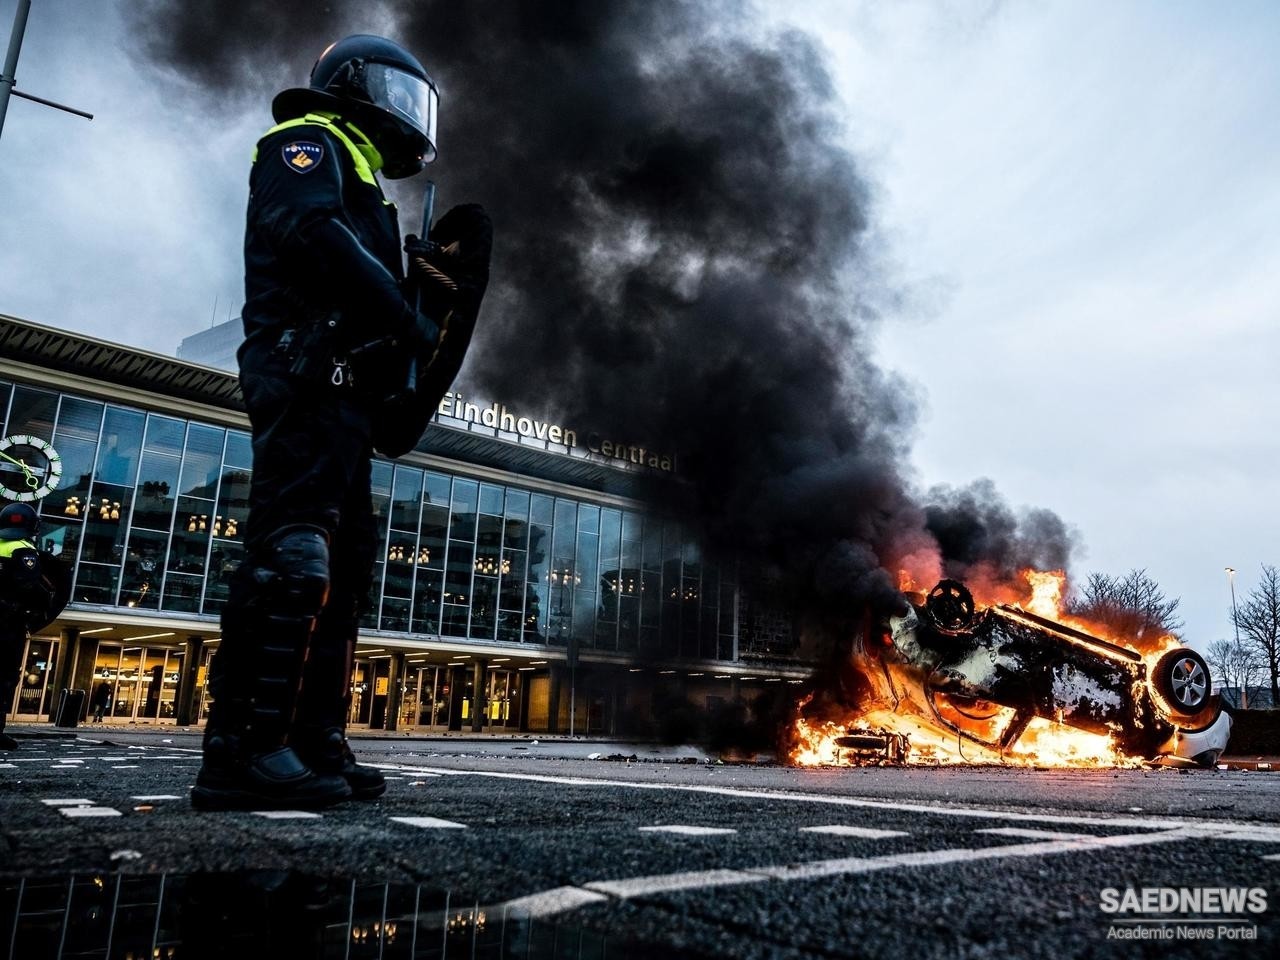 Anti-Lockdown Mob Brought Unrest to Streets in Netherlands